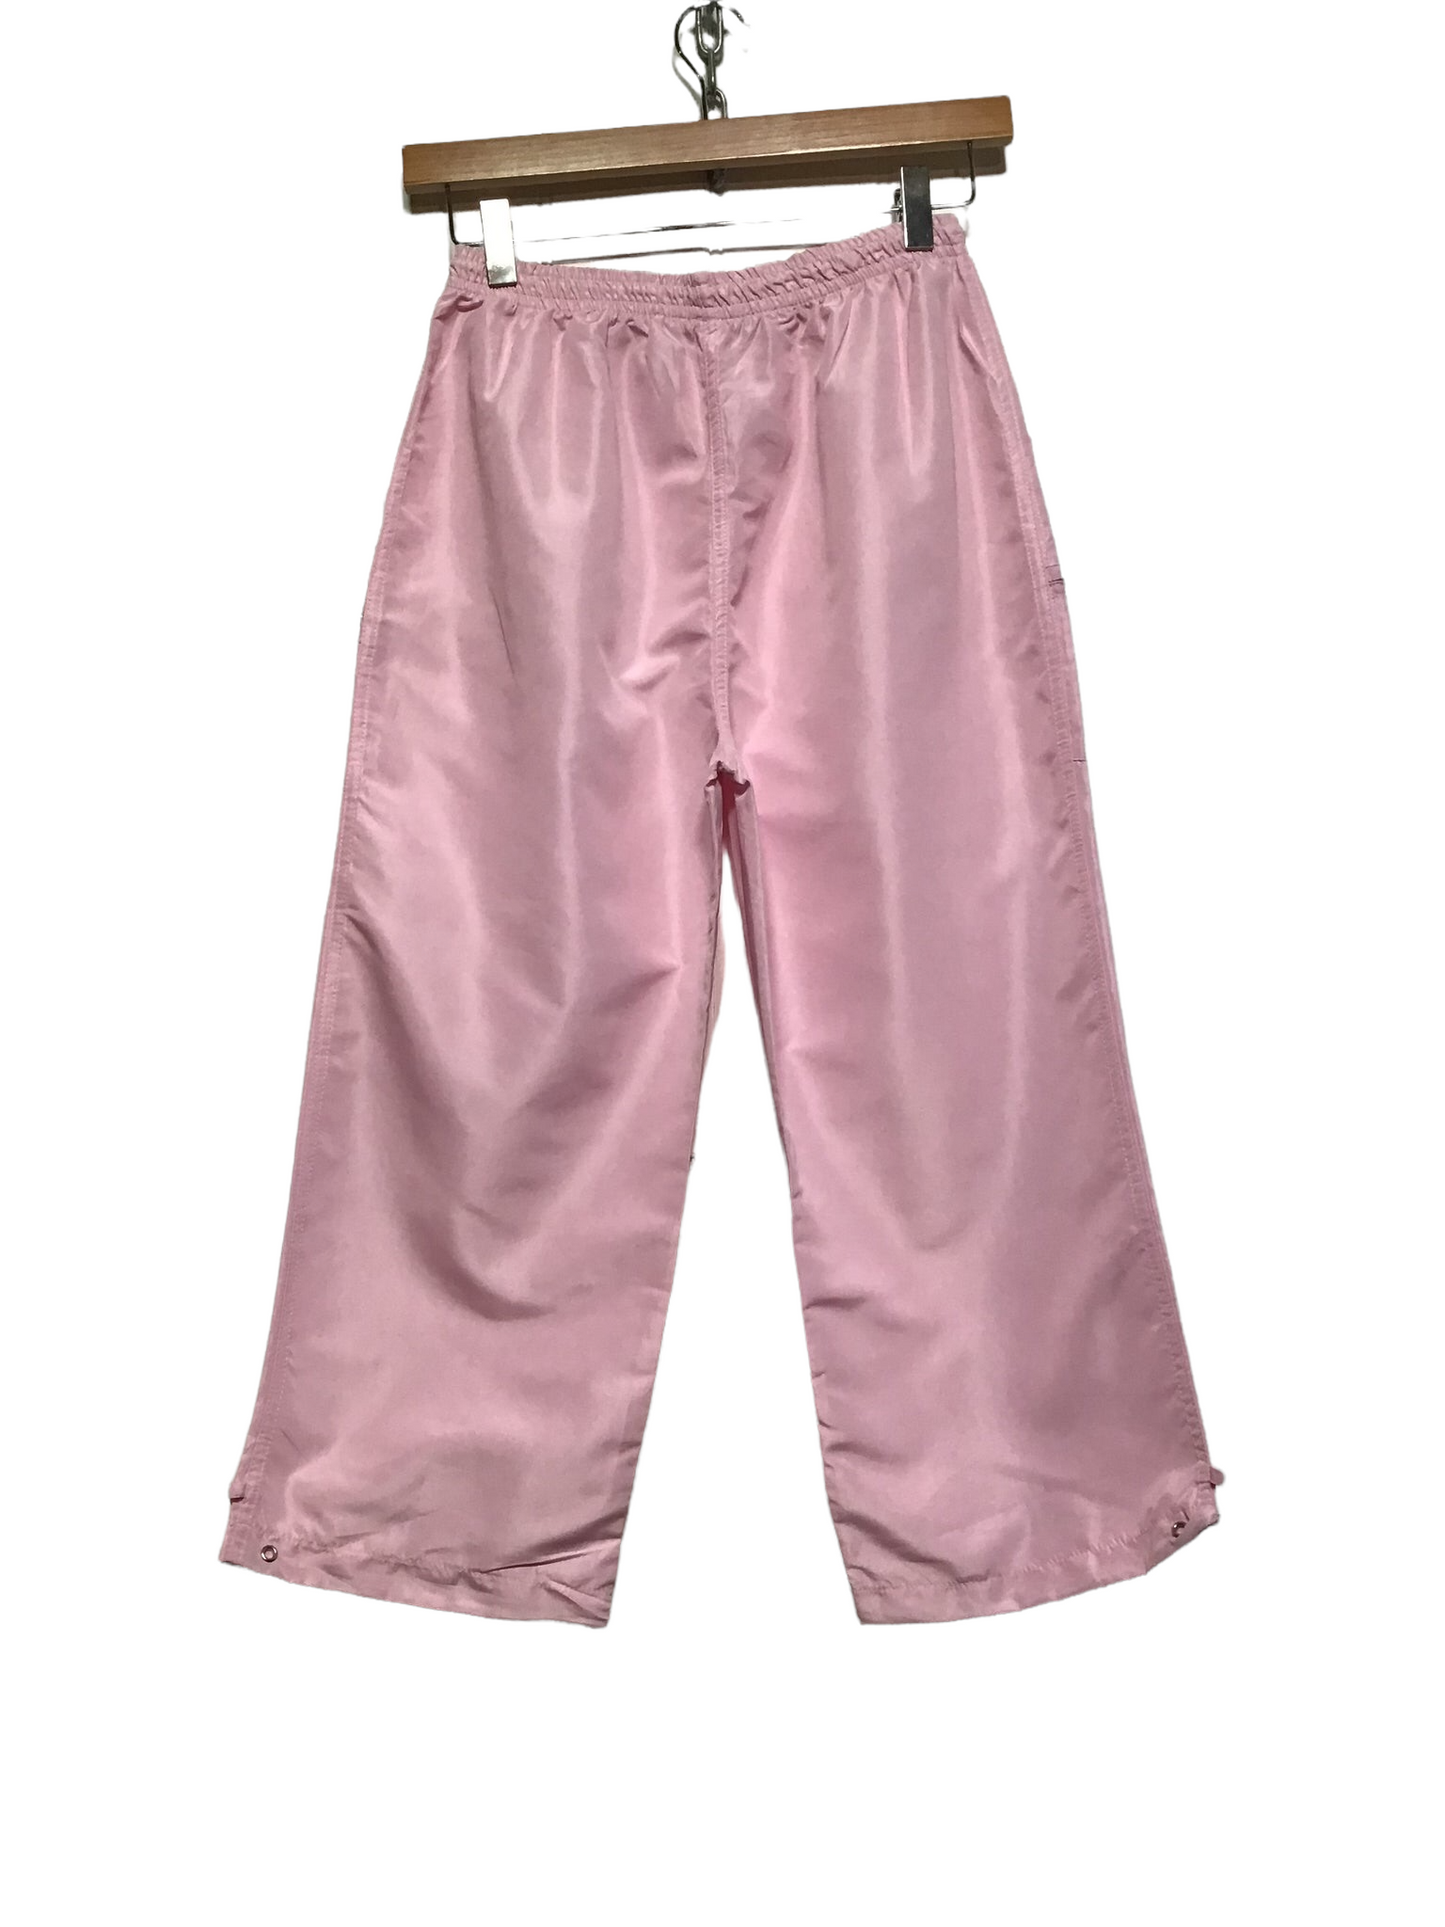 Woman’s Pink 3/4 Length Tracksuit Bottoms (Size XS/S)